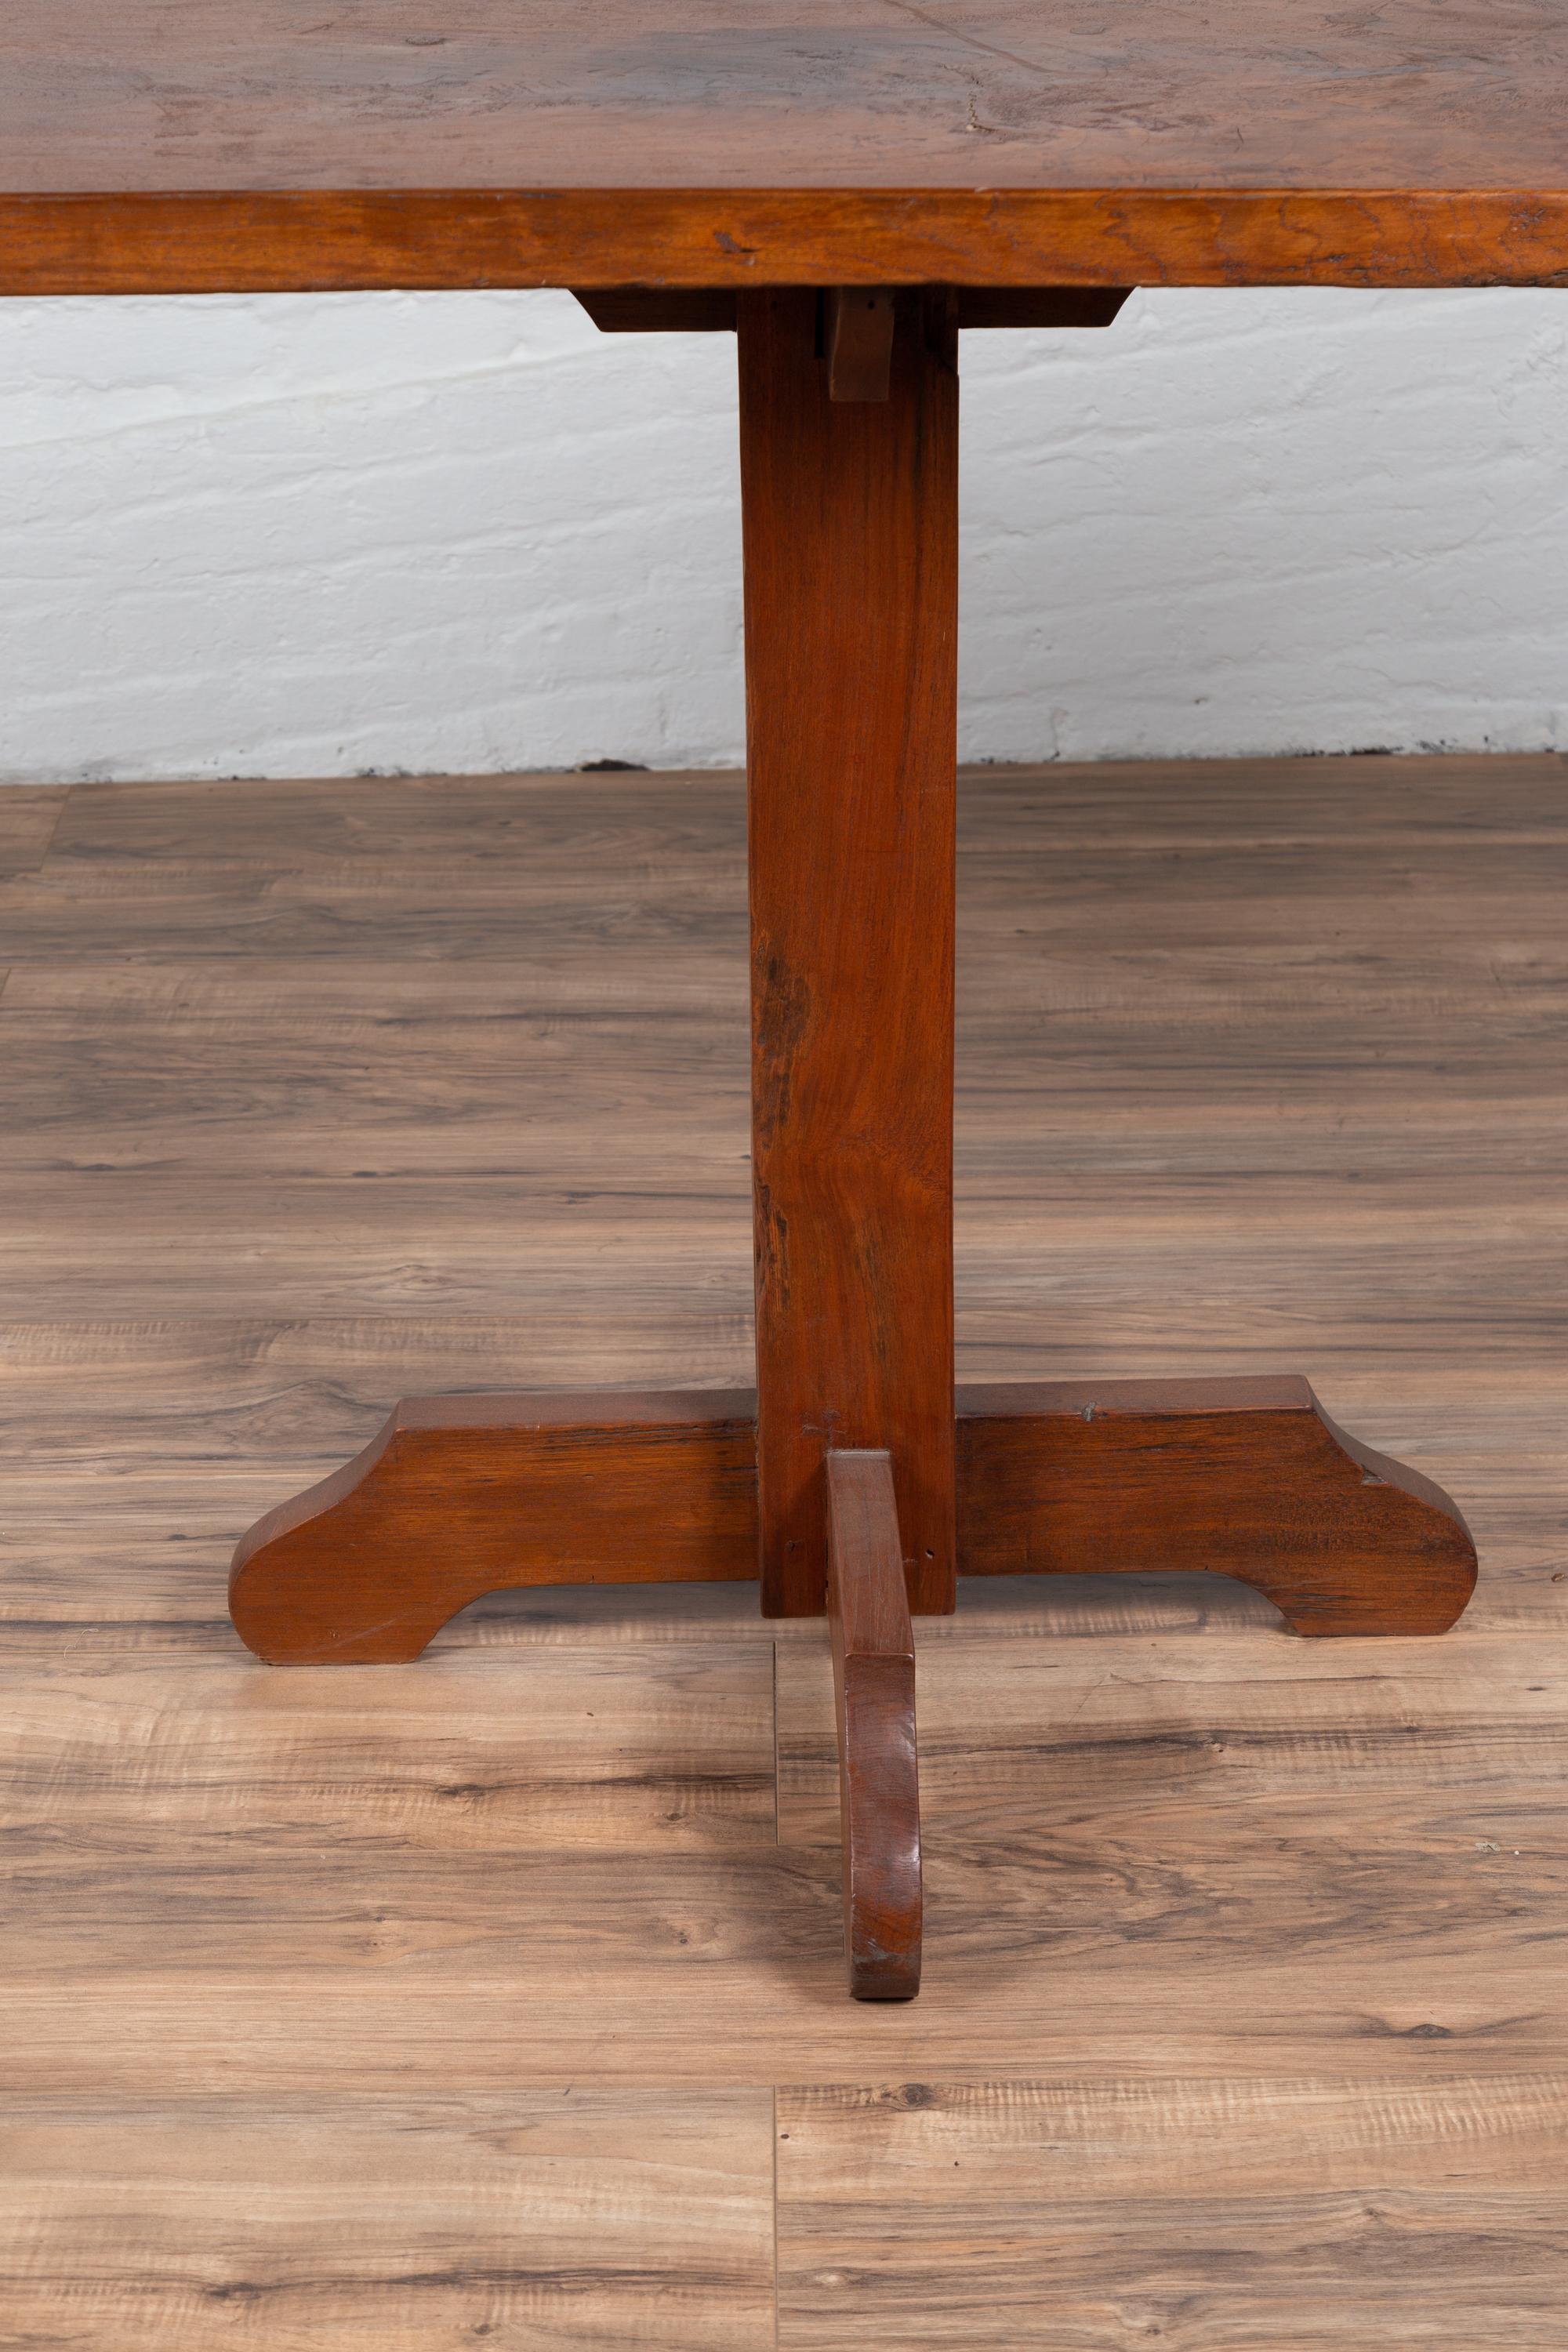 20th Century Rustic Indonesian Wooden Console Table with Single Plank Top and Pedestal Base For Sale